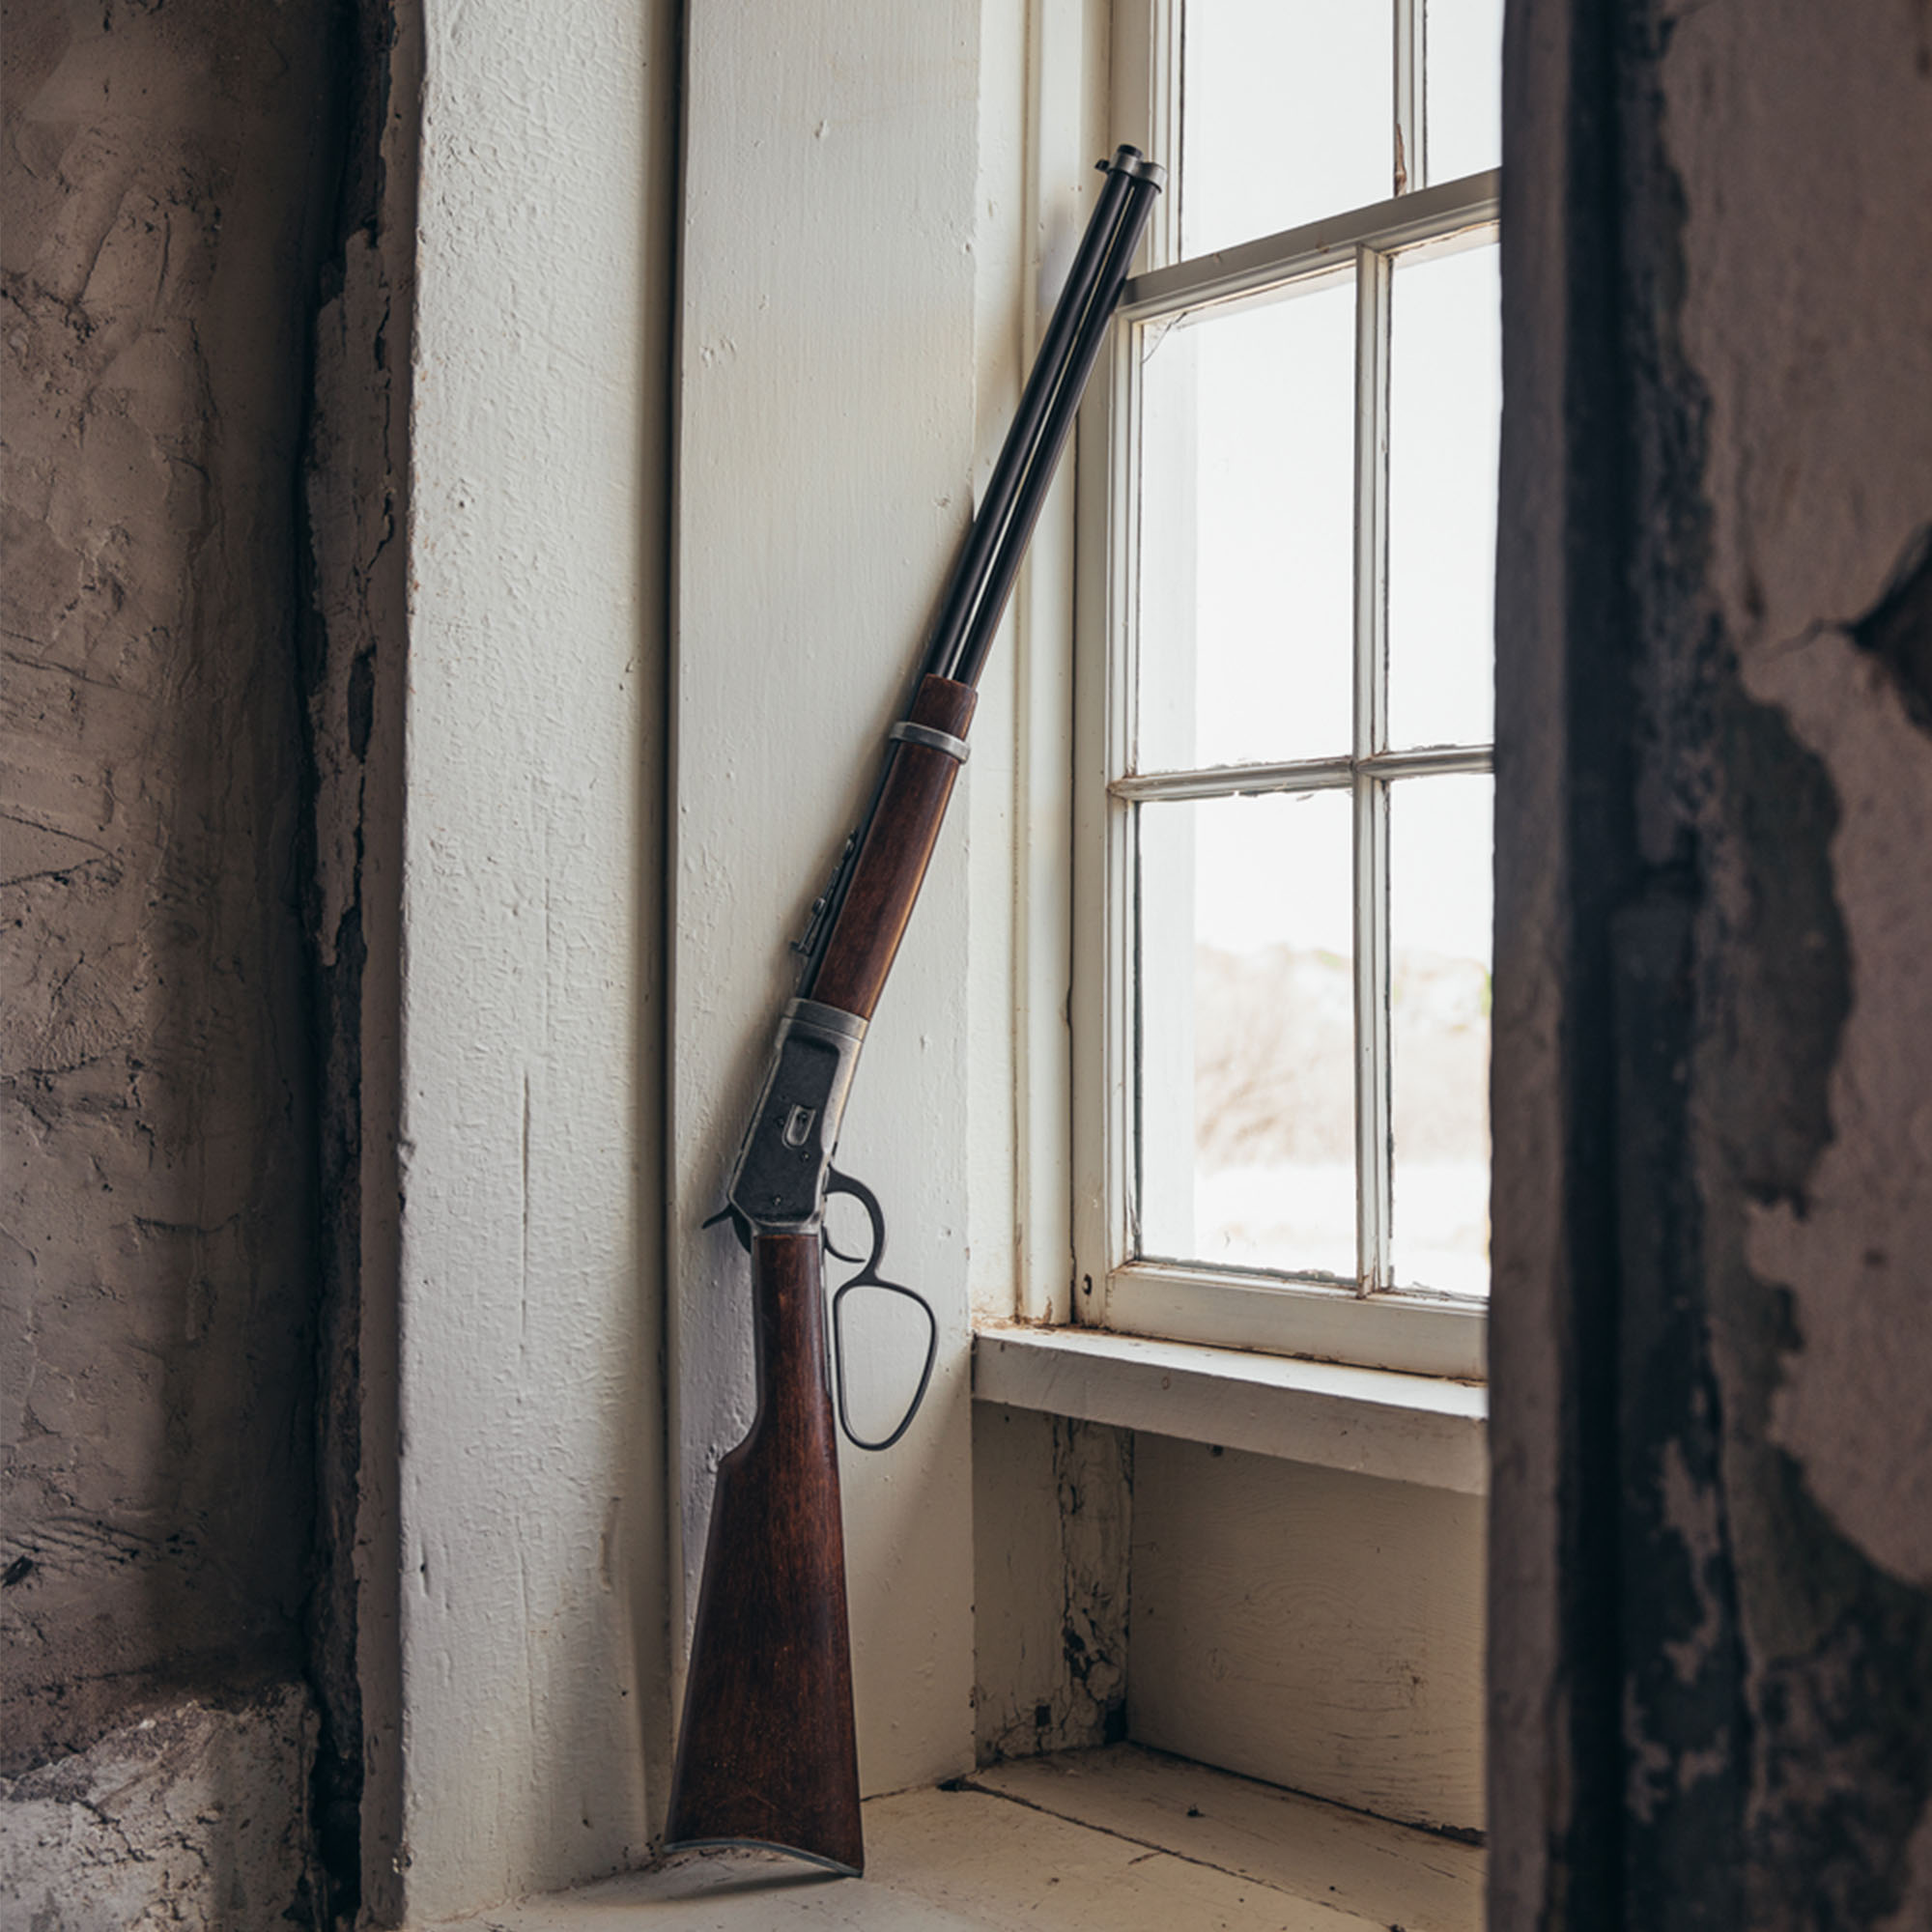 old west rifle replica leaning against a window